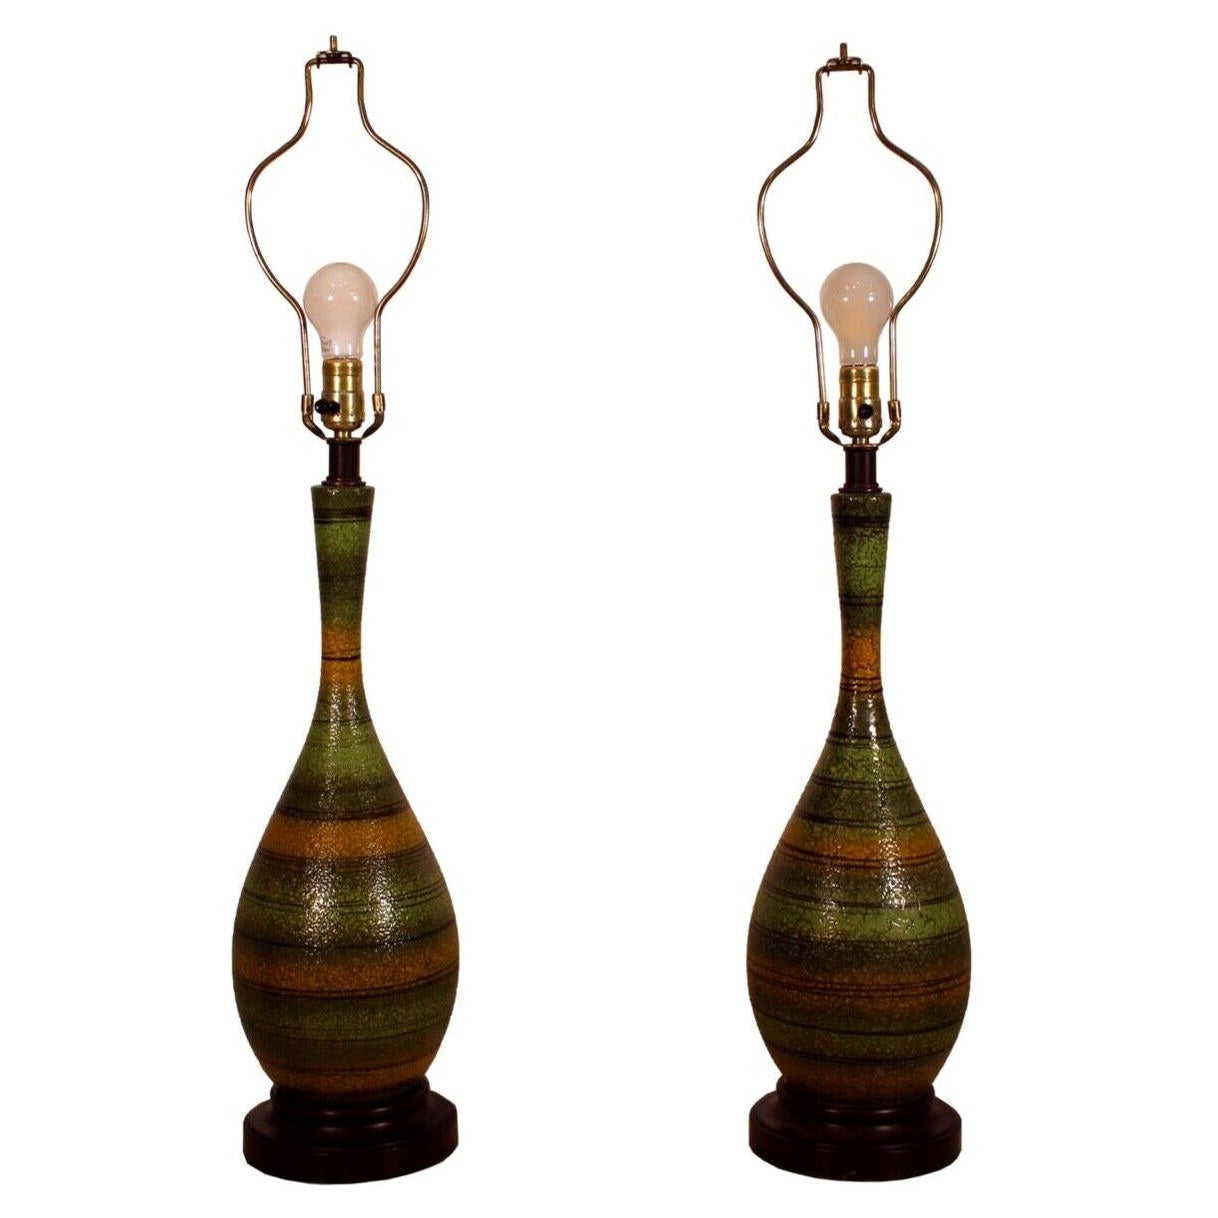 Pair of Mid-Century Modern Green Striped Ceramic Lamps